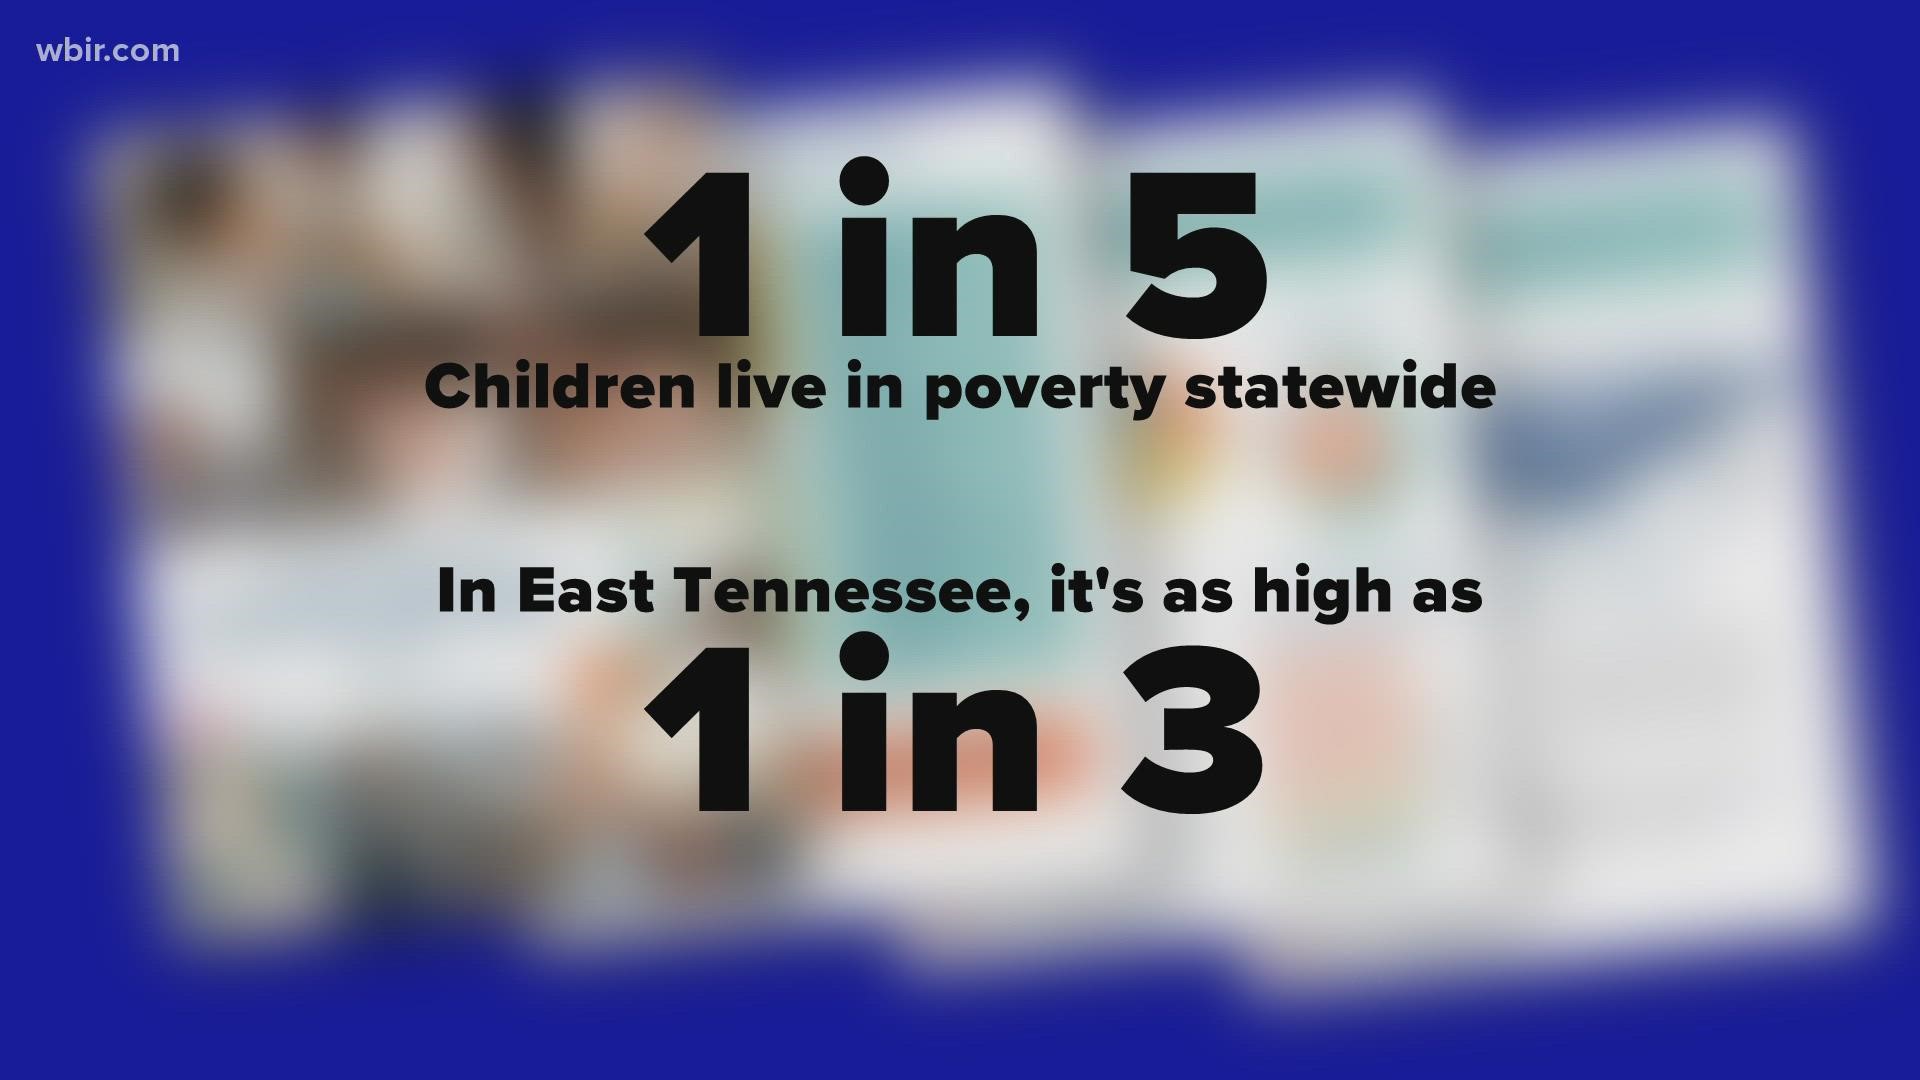 In some East Tennessee counties, as many as a third of all children live below the poverty line.